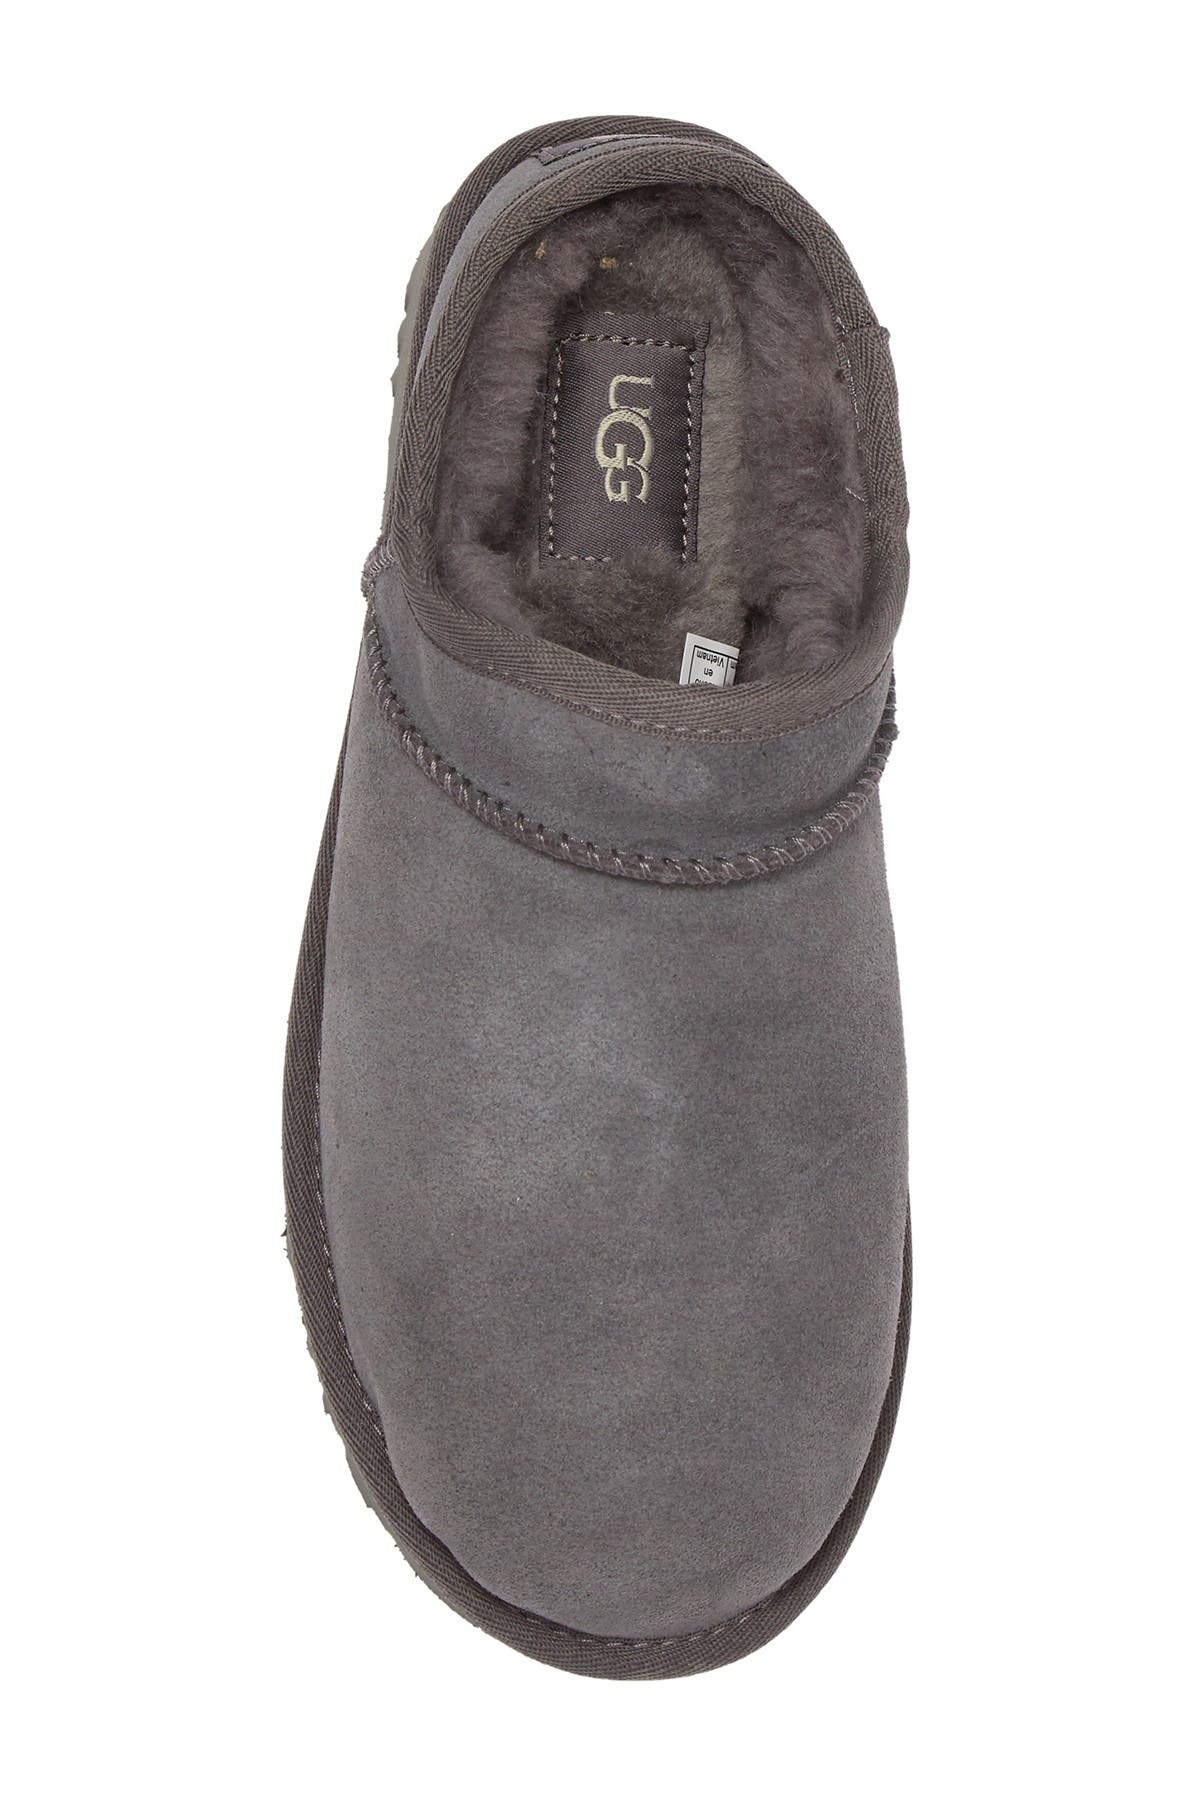 uggs classic slippers